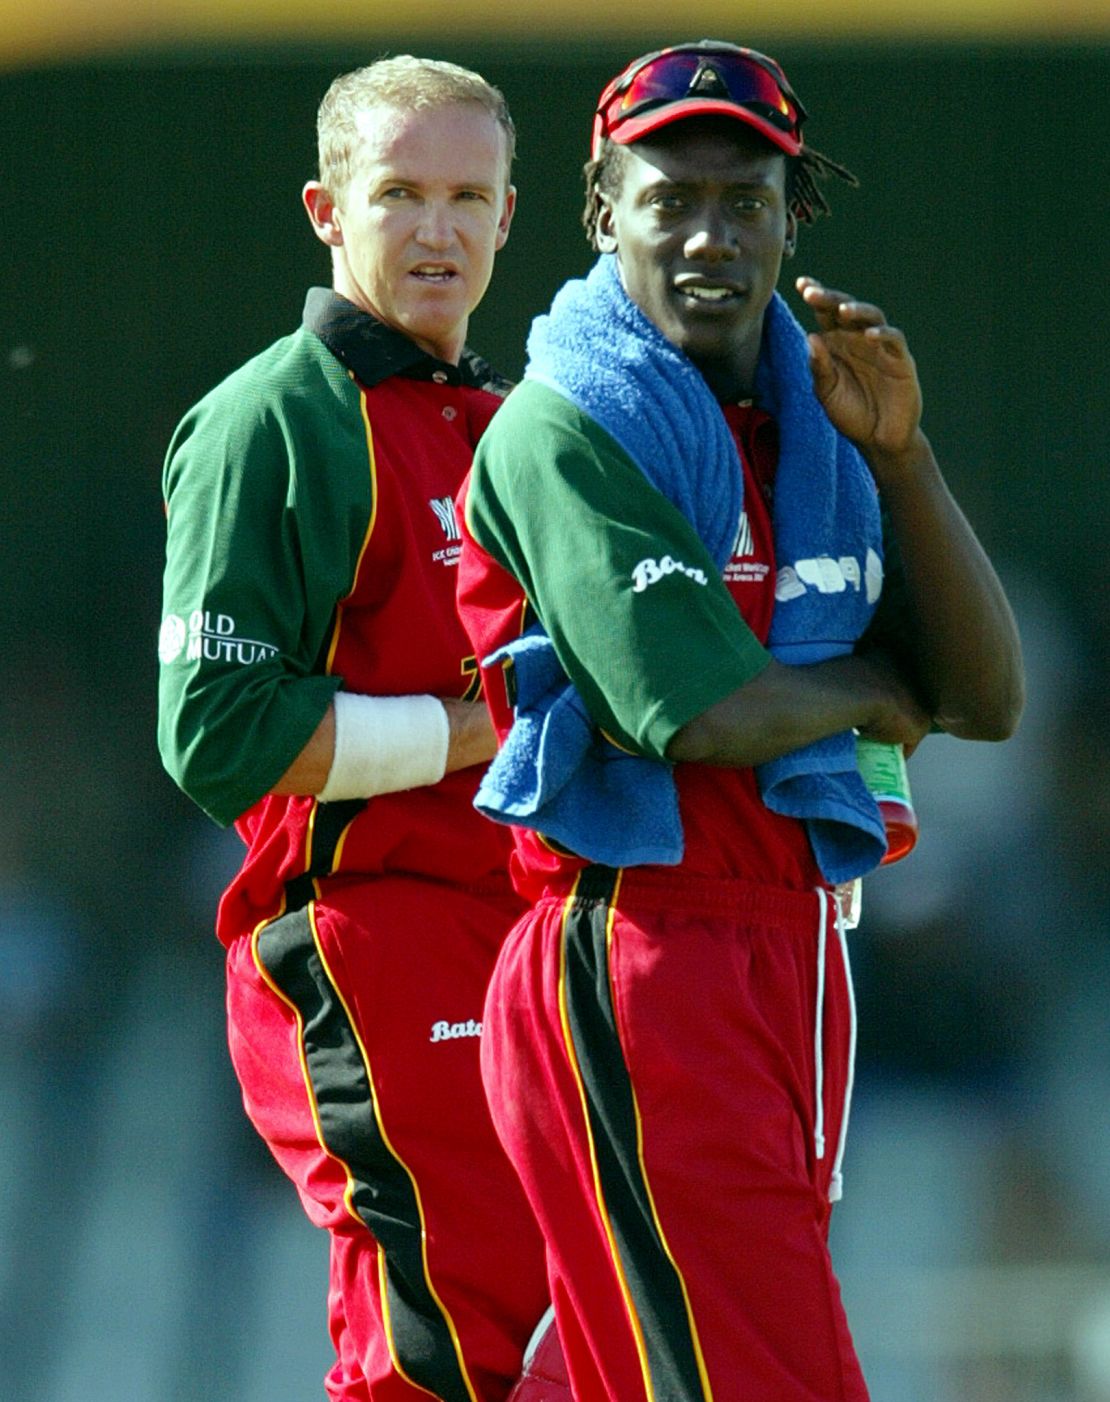 Flower (left) and Olonga were both exiled from Zimbabwe following their Cricket World Cup protest.